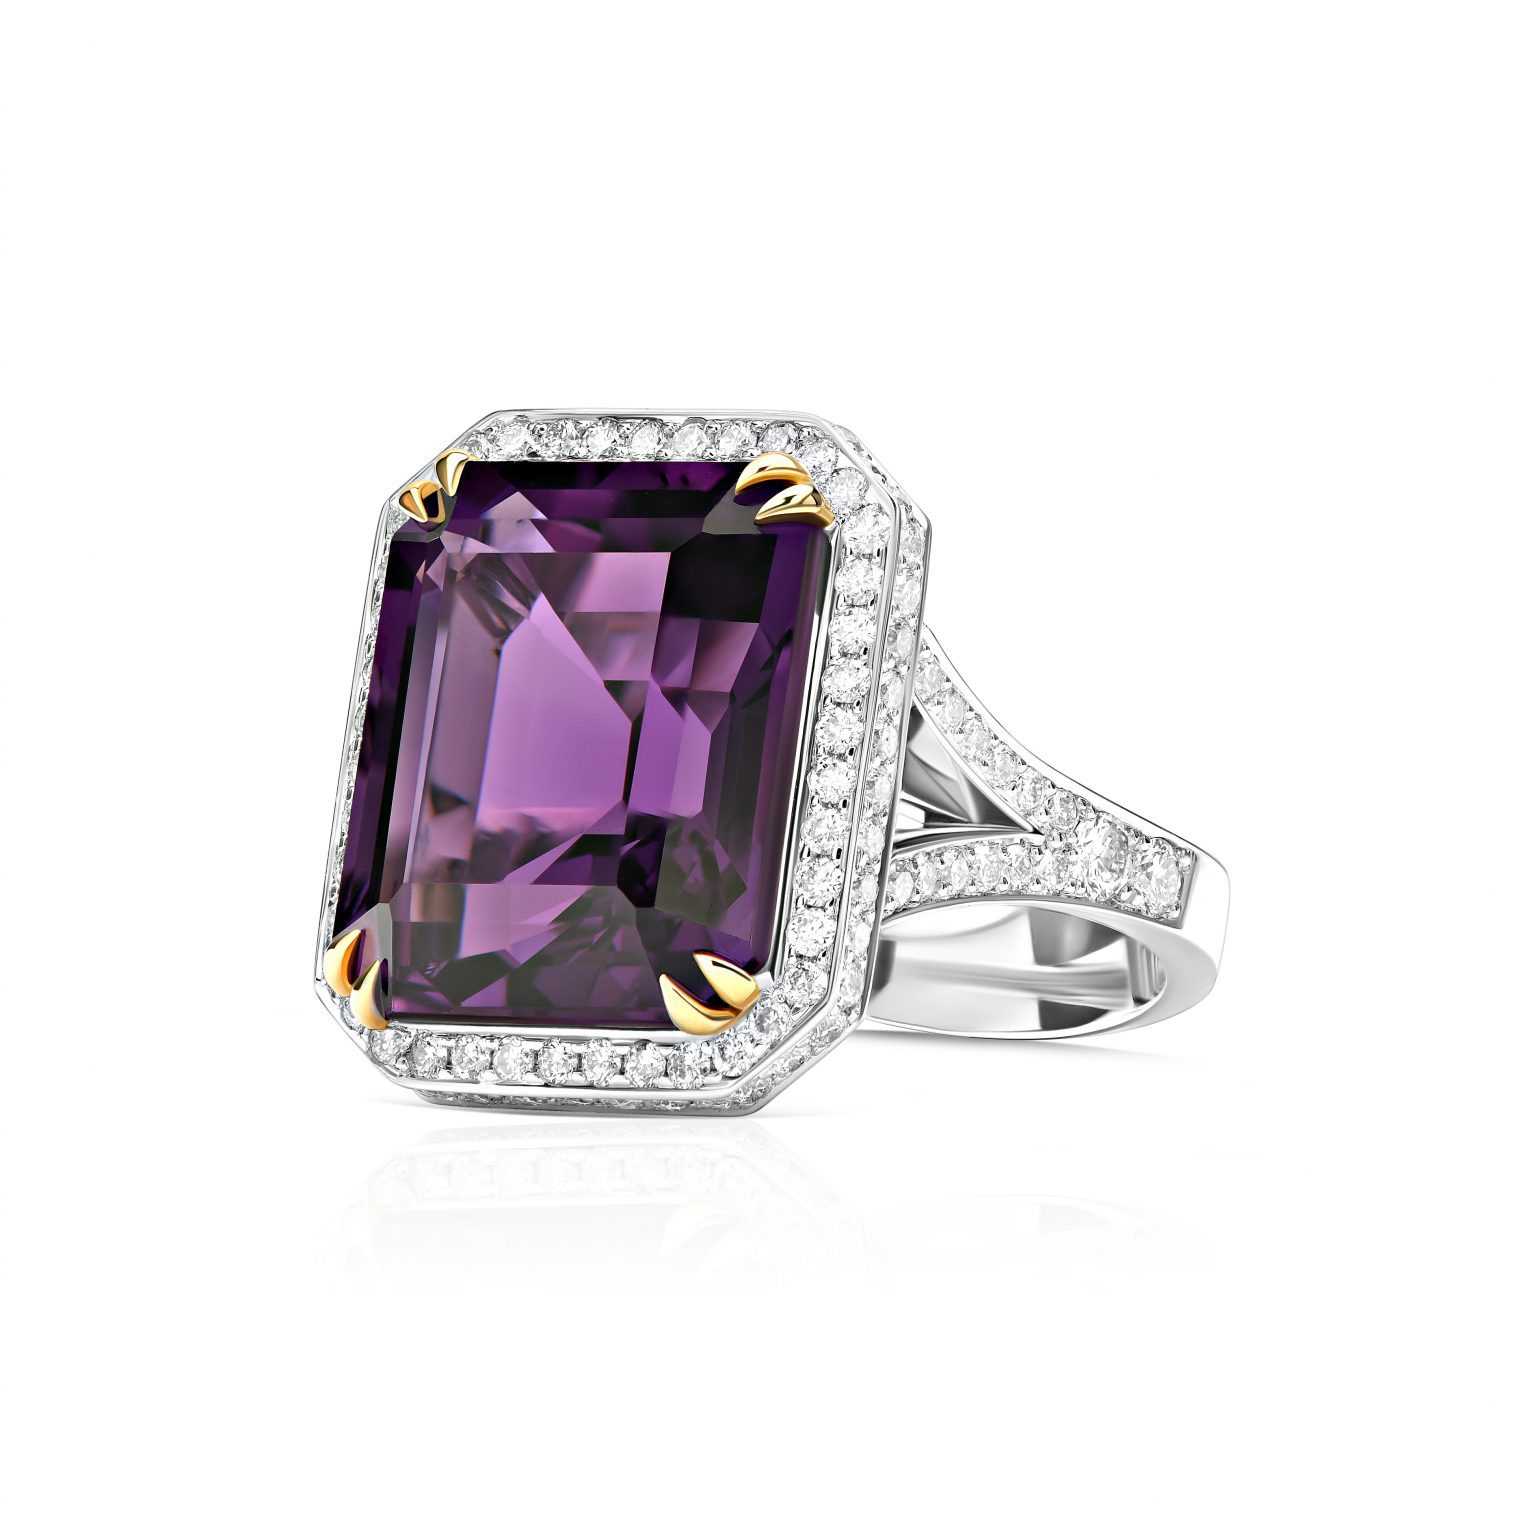 10.98 ct White Gold Spinel Amethyst Ring